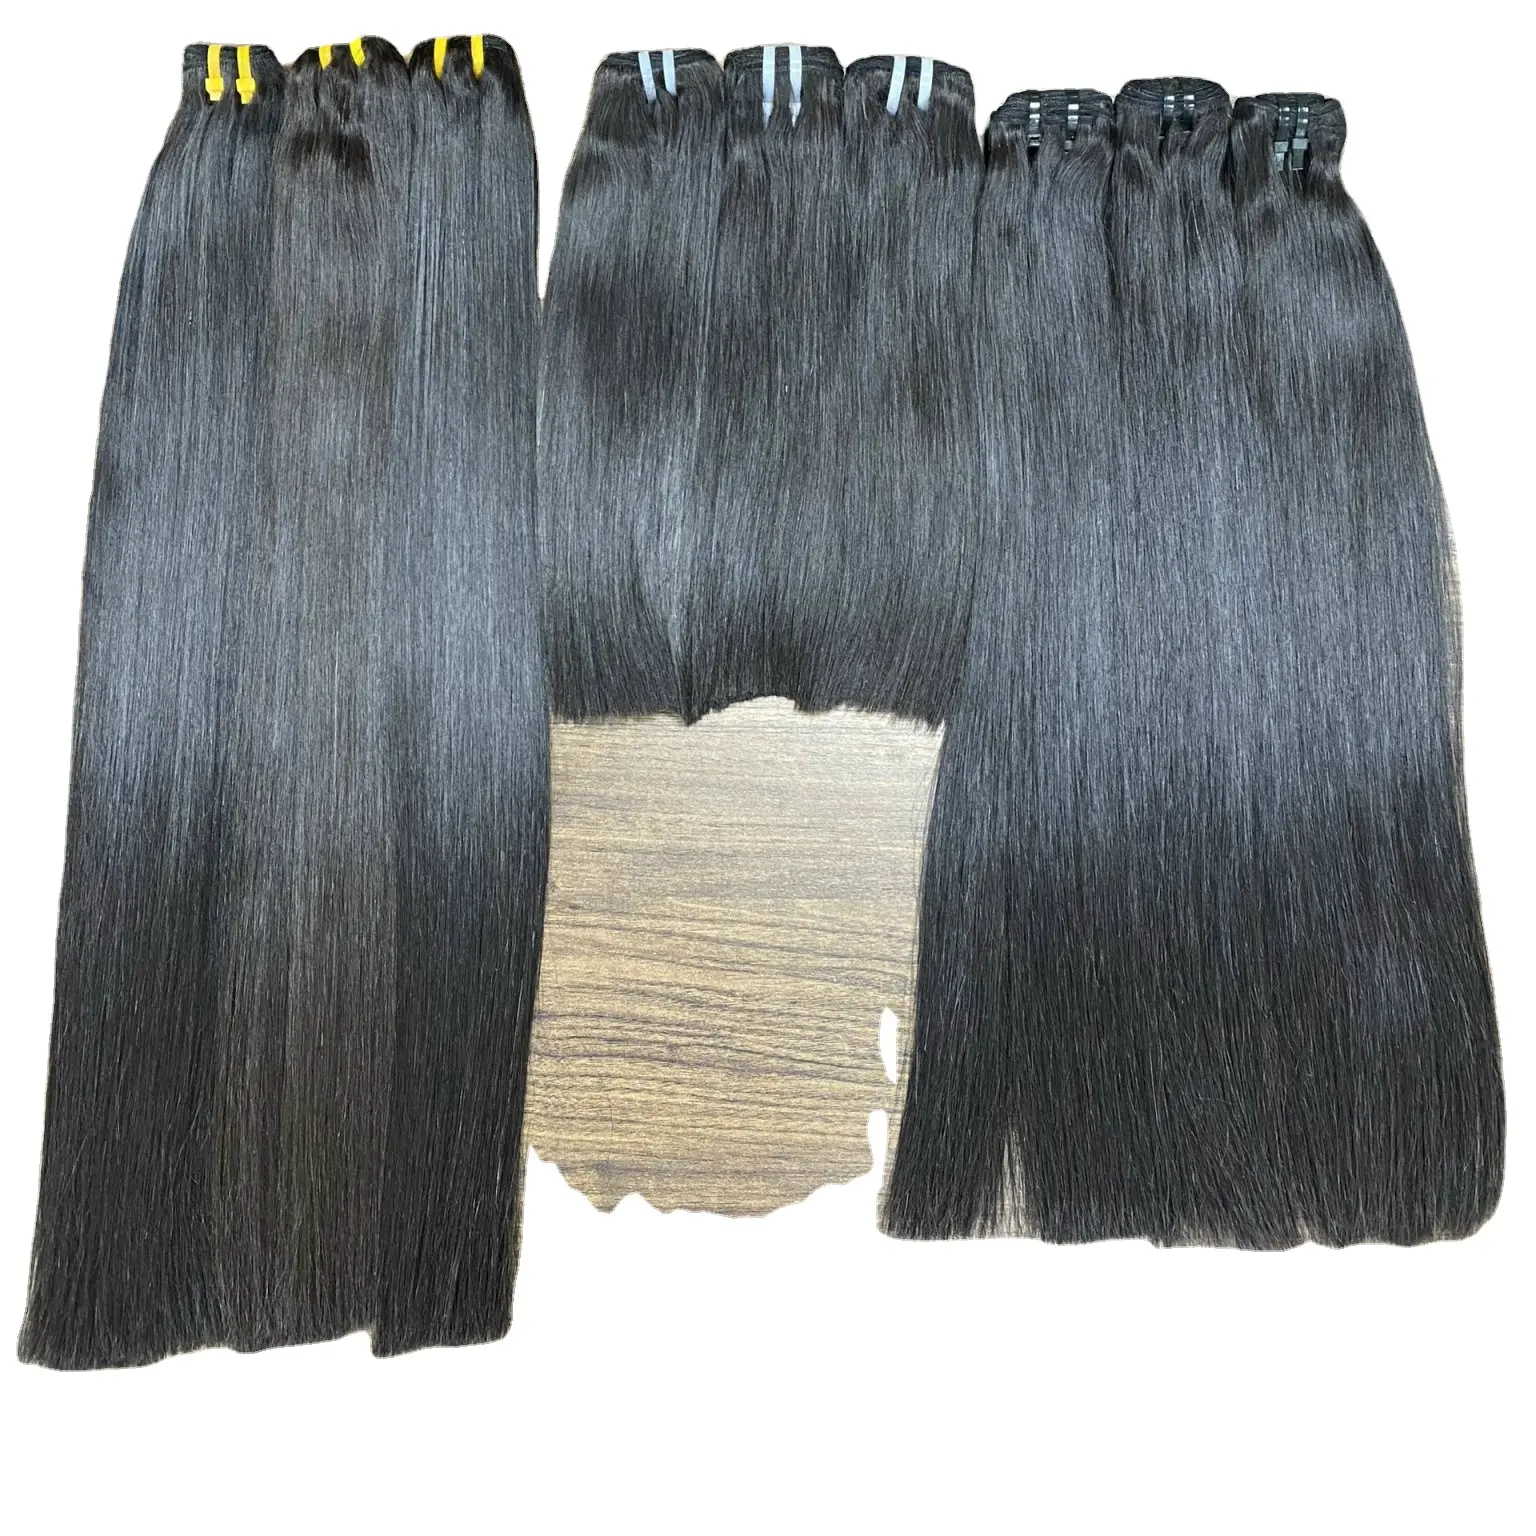 Best selling bone straight double drawn human hair cut directly from Vietnamese young girl with luxury hair